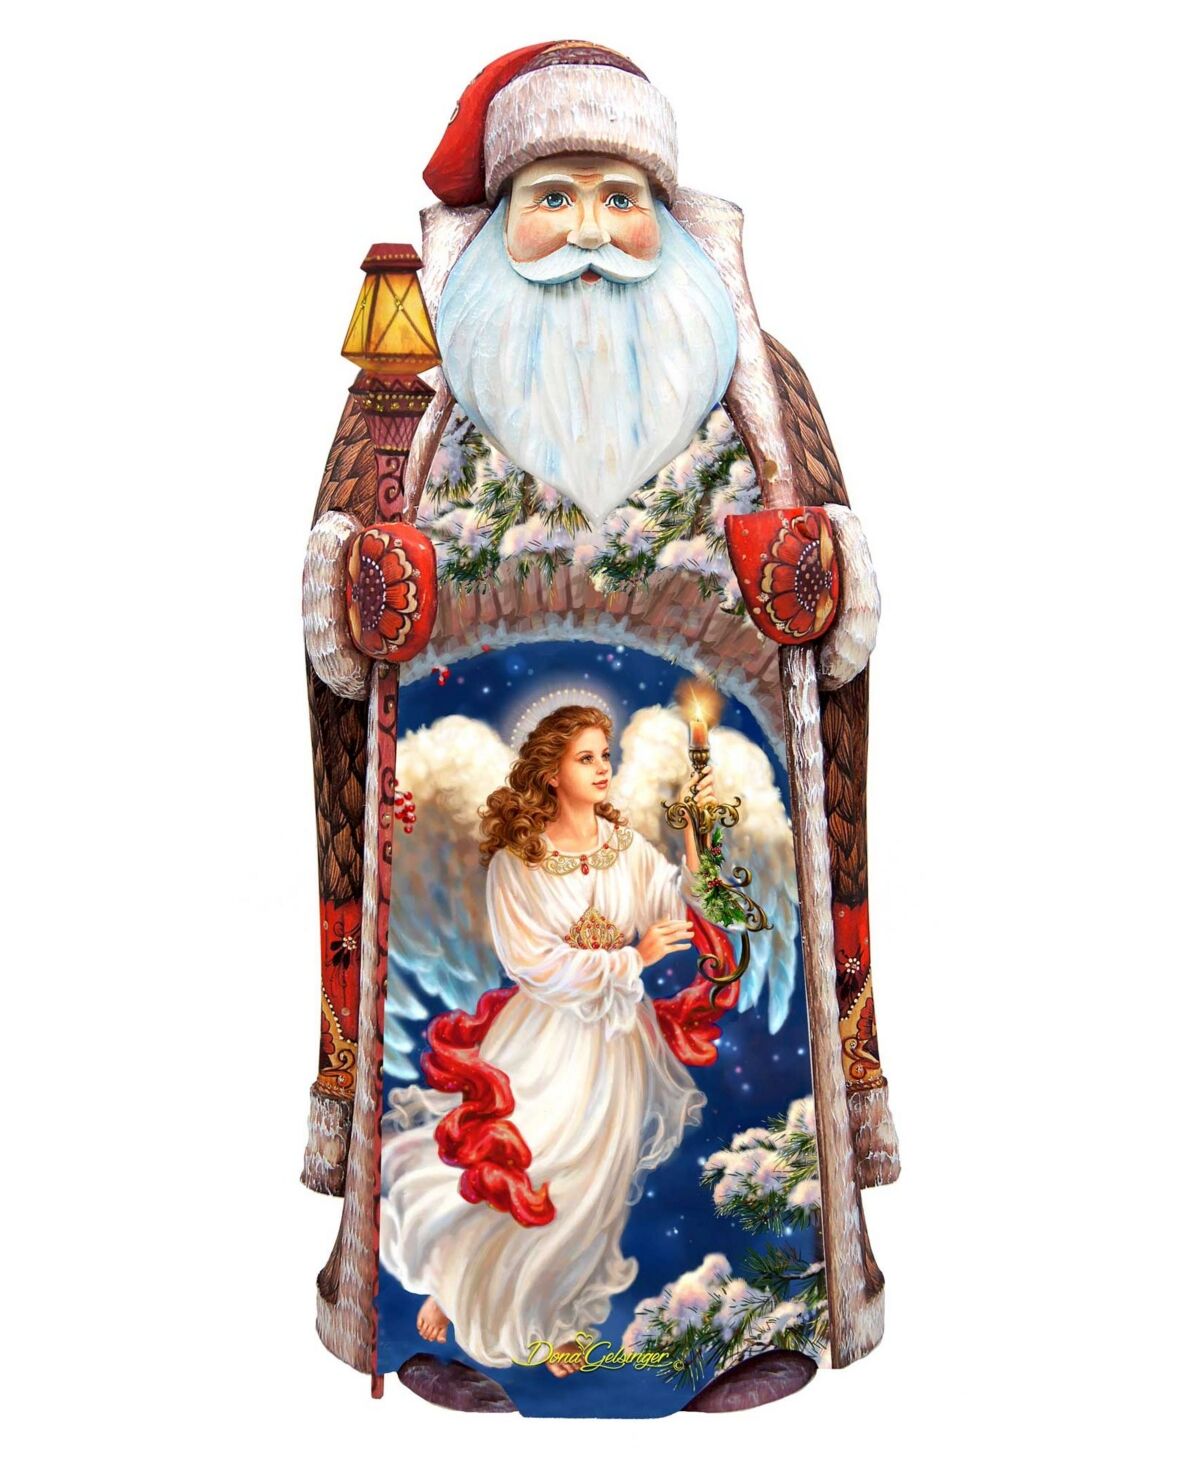 G.DeBrekht Woodcarved Hand Painted Angel in The Arch Santa by Donna Gelsinger Figurine - Multi